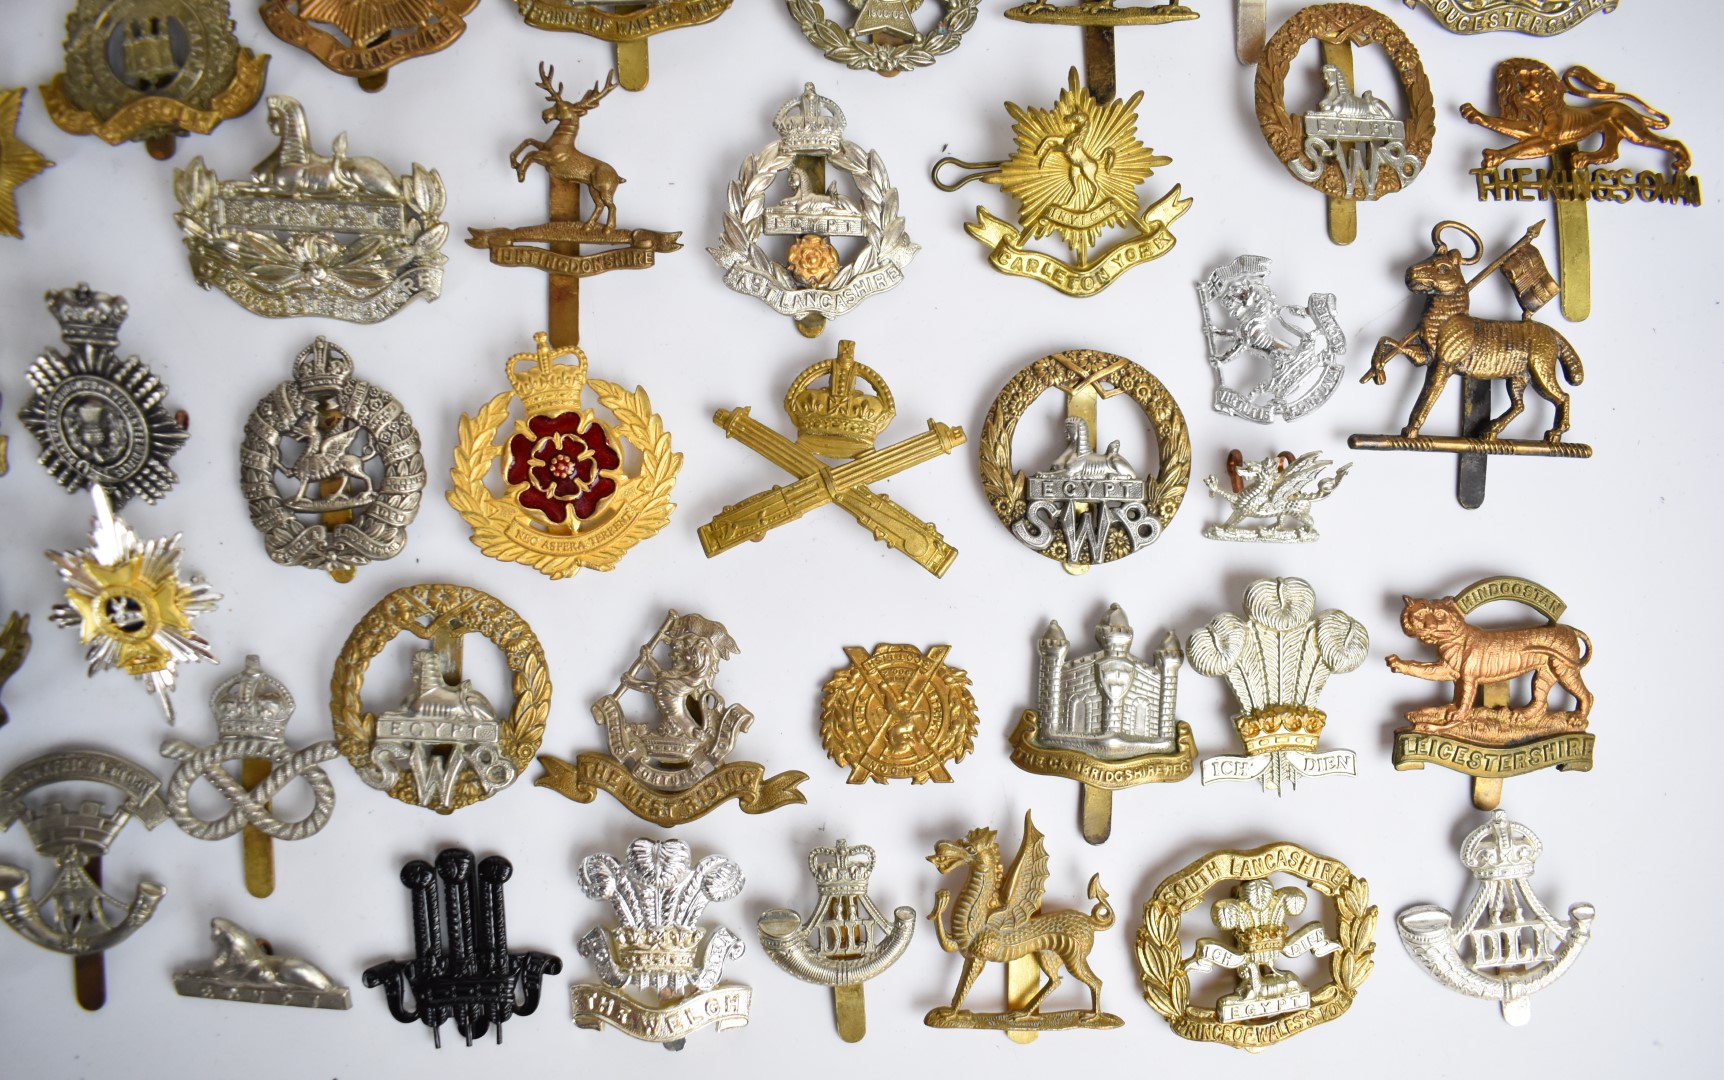 Large collection of approximately 100 British Army cap badges including Royal Sussex Regiment, - Image 10 of 14